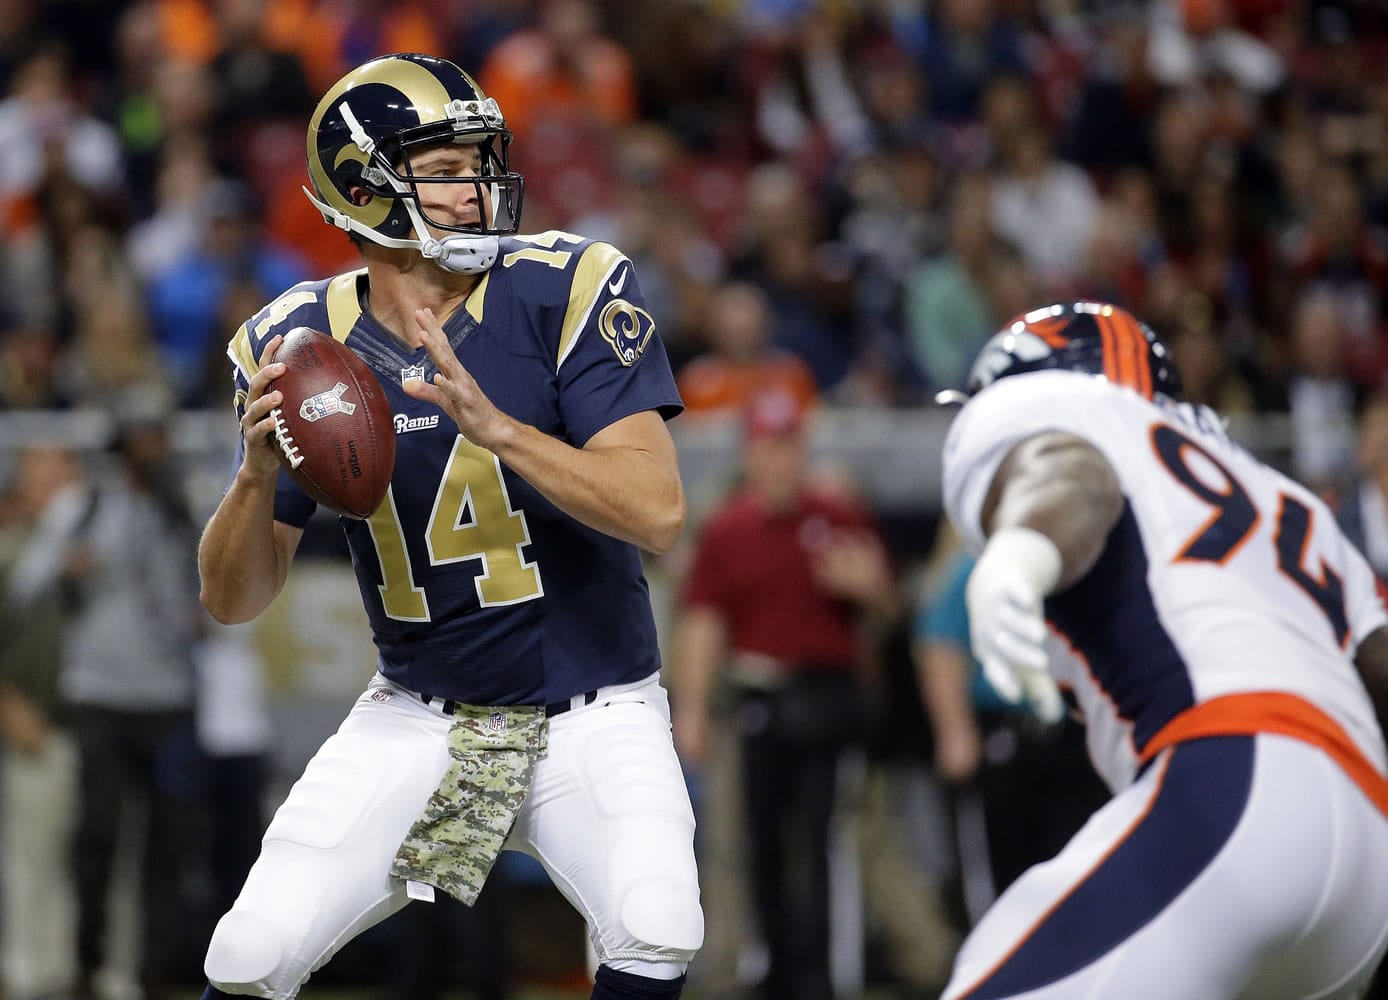 St. Louis Rams quarterback Shaun Hill, left, throws under pressure from Denver Broncos defensive end DeMarcus Ware during the first quarter Sunday, Nov. 16, 2014, in St. Louis.